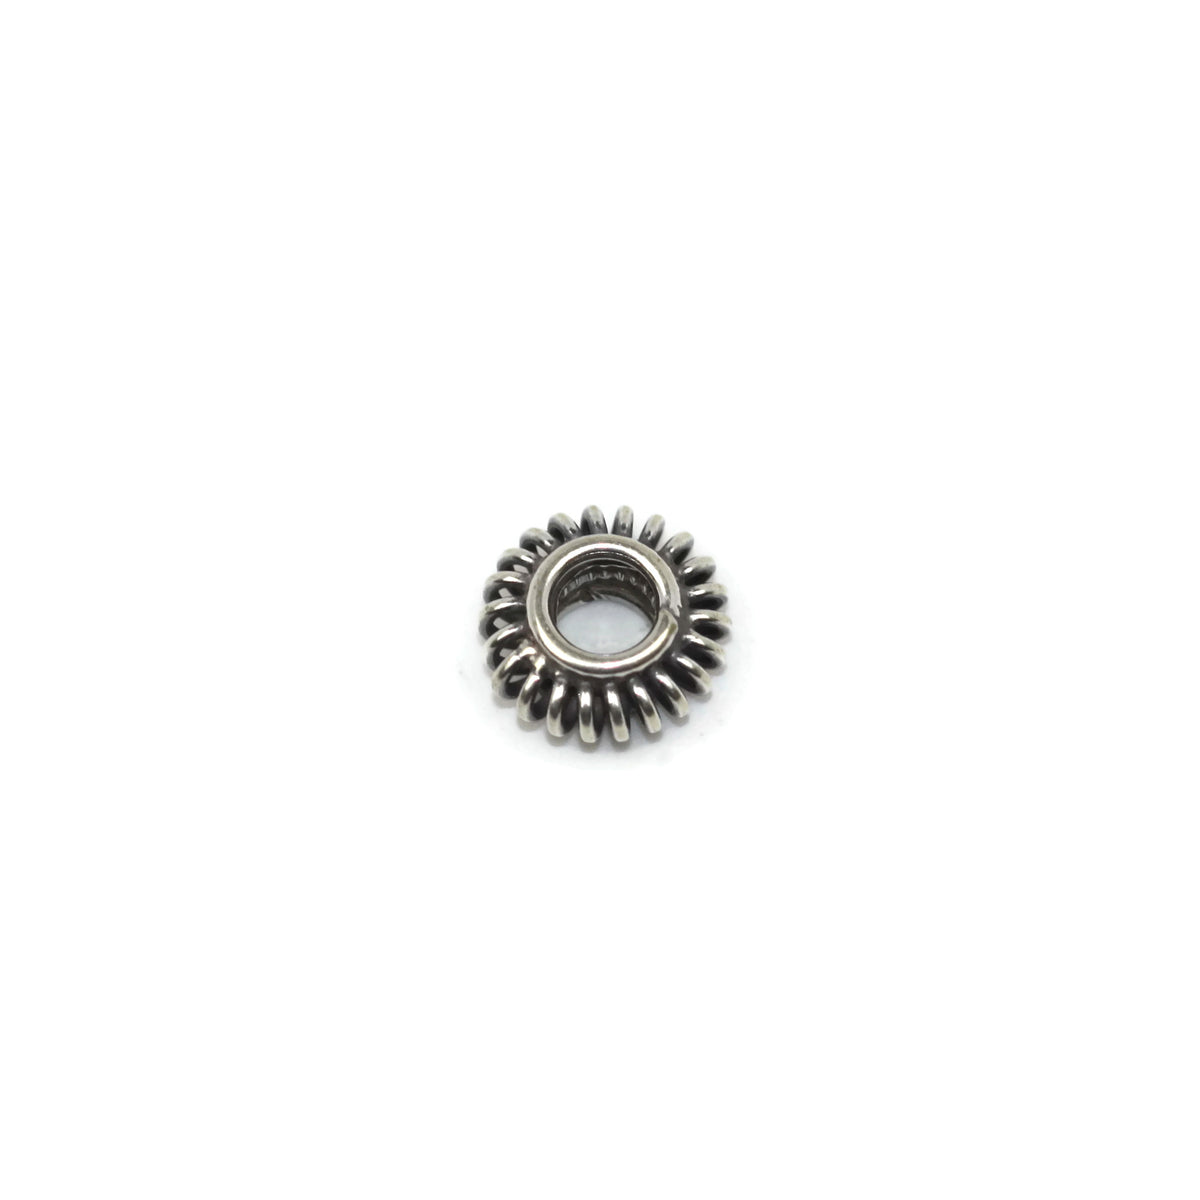 Bali Bead Sterling Silver Coil Spacer 3.5 x 8mm